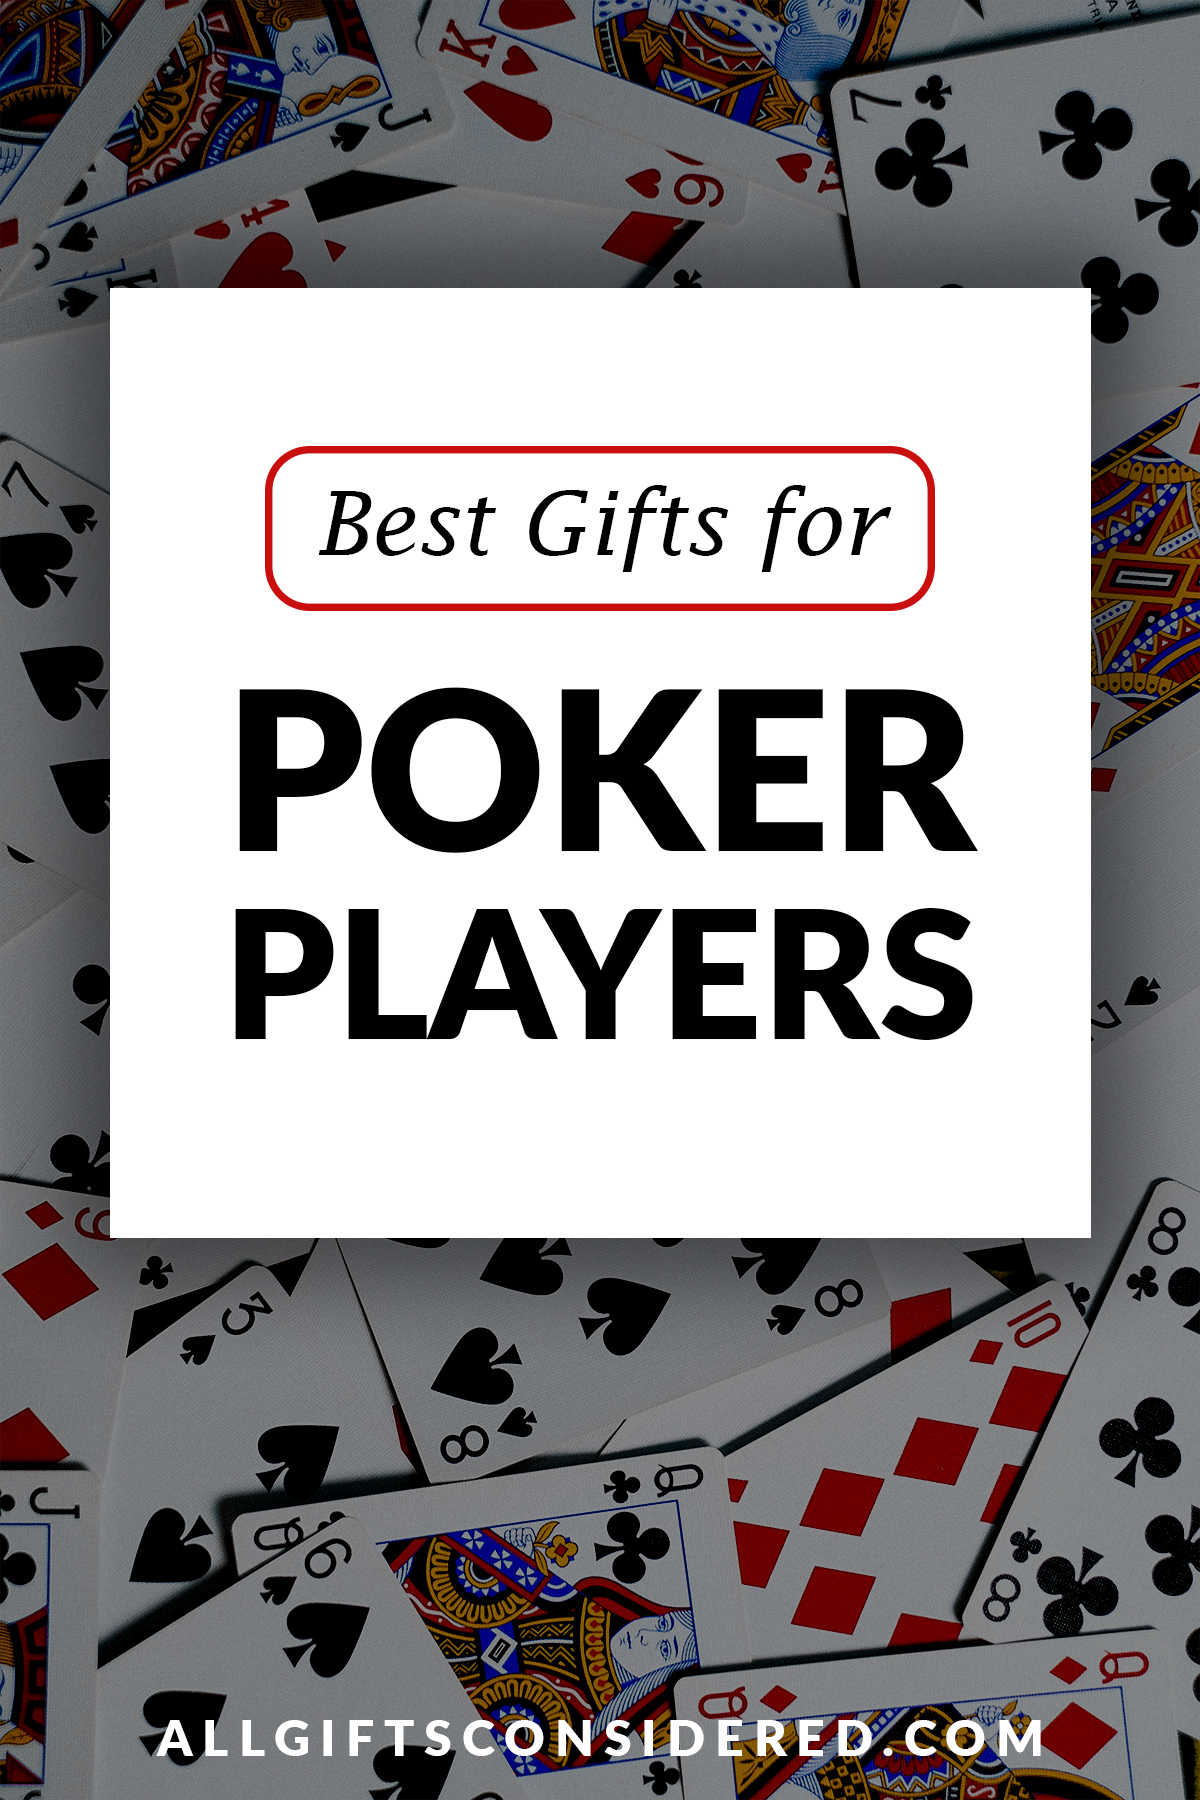 Poker player gifts - feature image